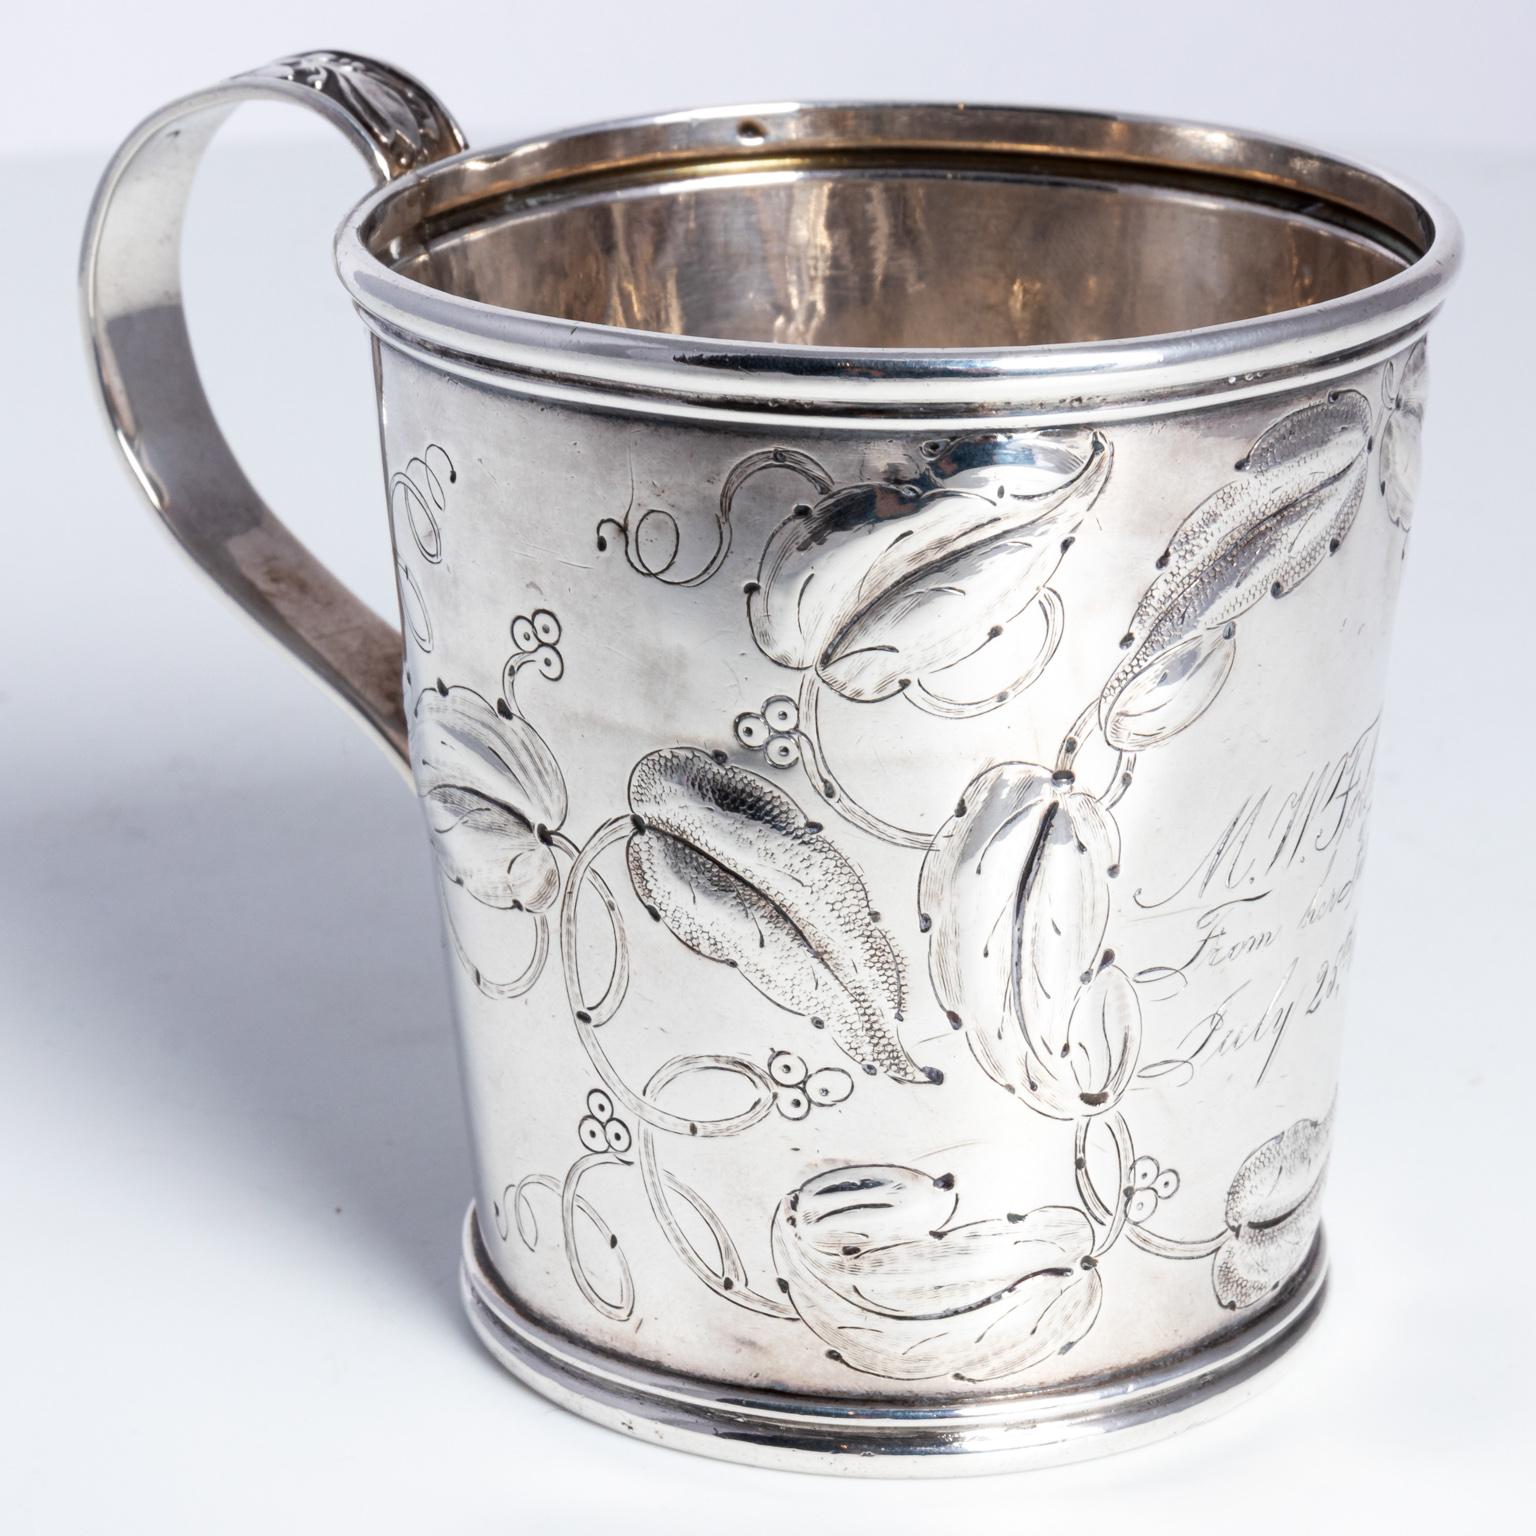 American made baby cup made of coin silver, circa mid-19th century. The engraving on the front is from 1857. It weighs 110.40 grams. The piece is marked on the bottom 